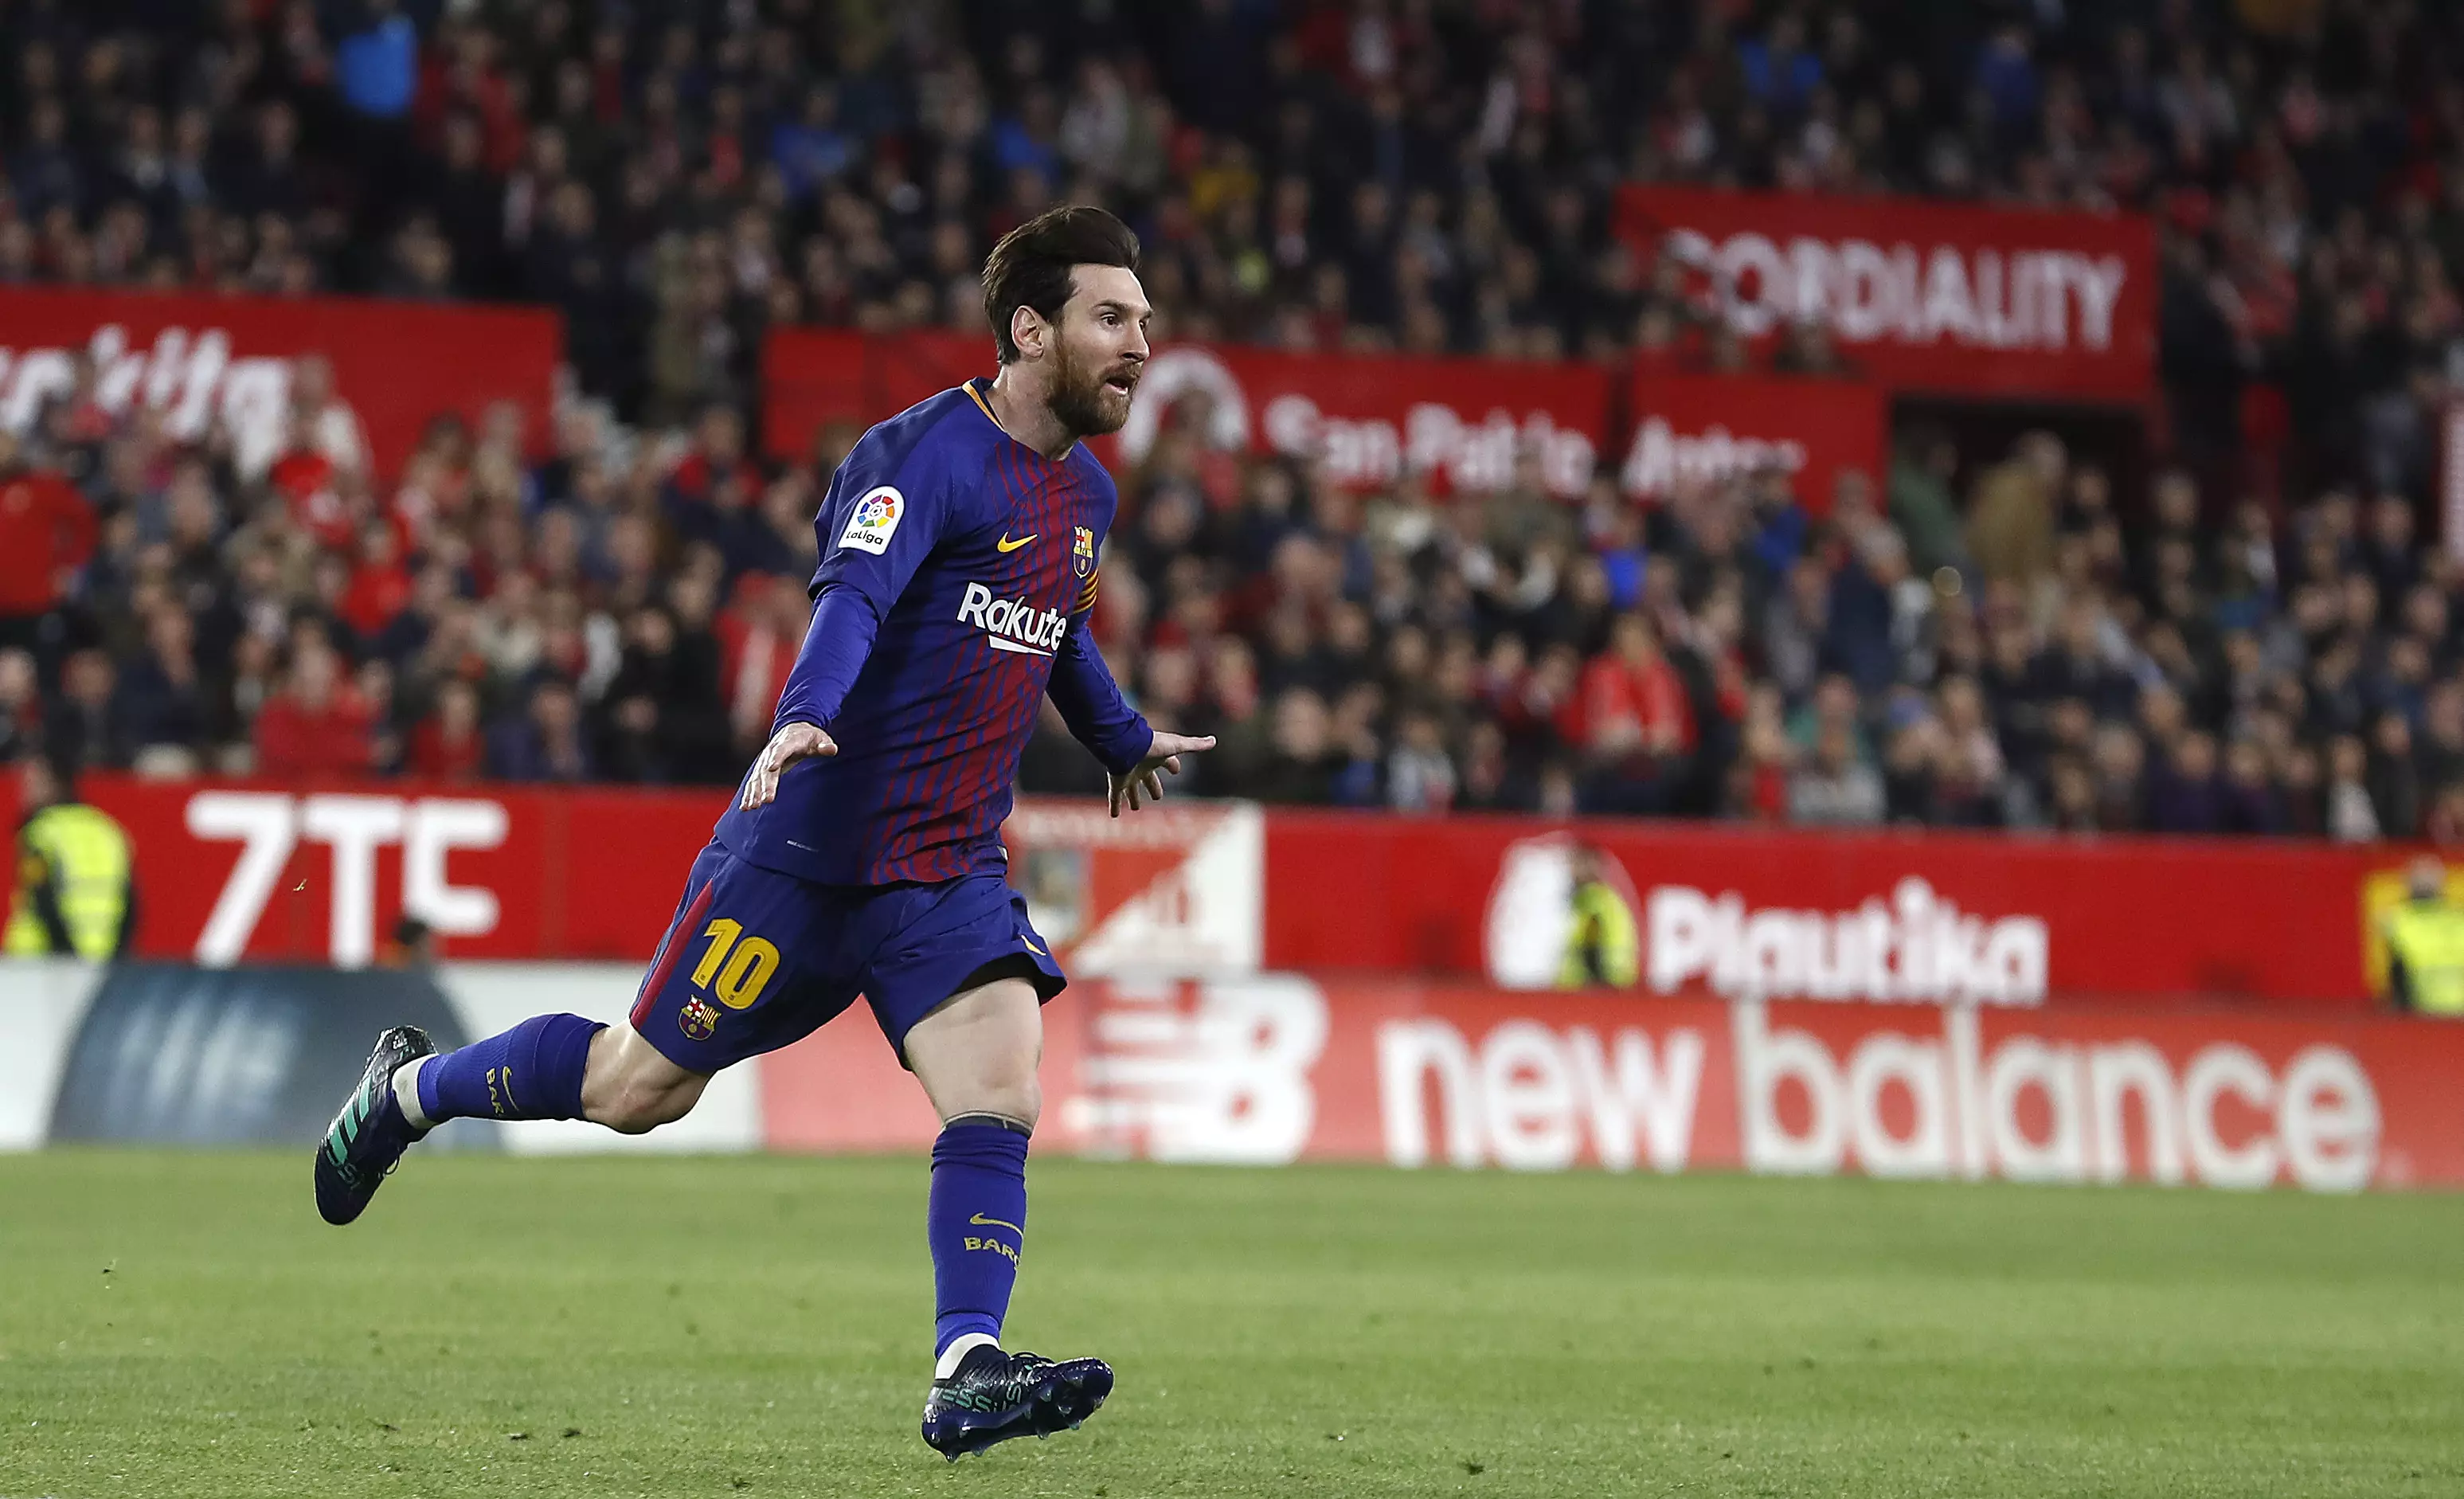 Messi celebrates his equaliser after coming off the bench. Image: PA Images.